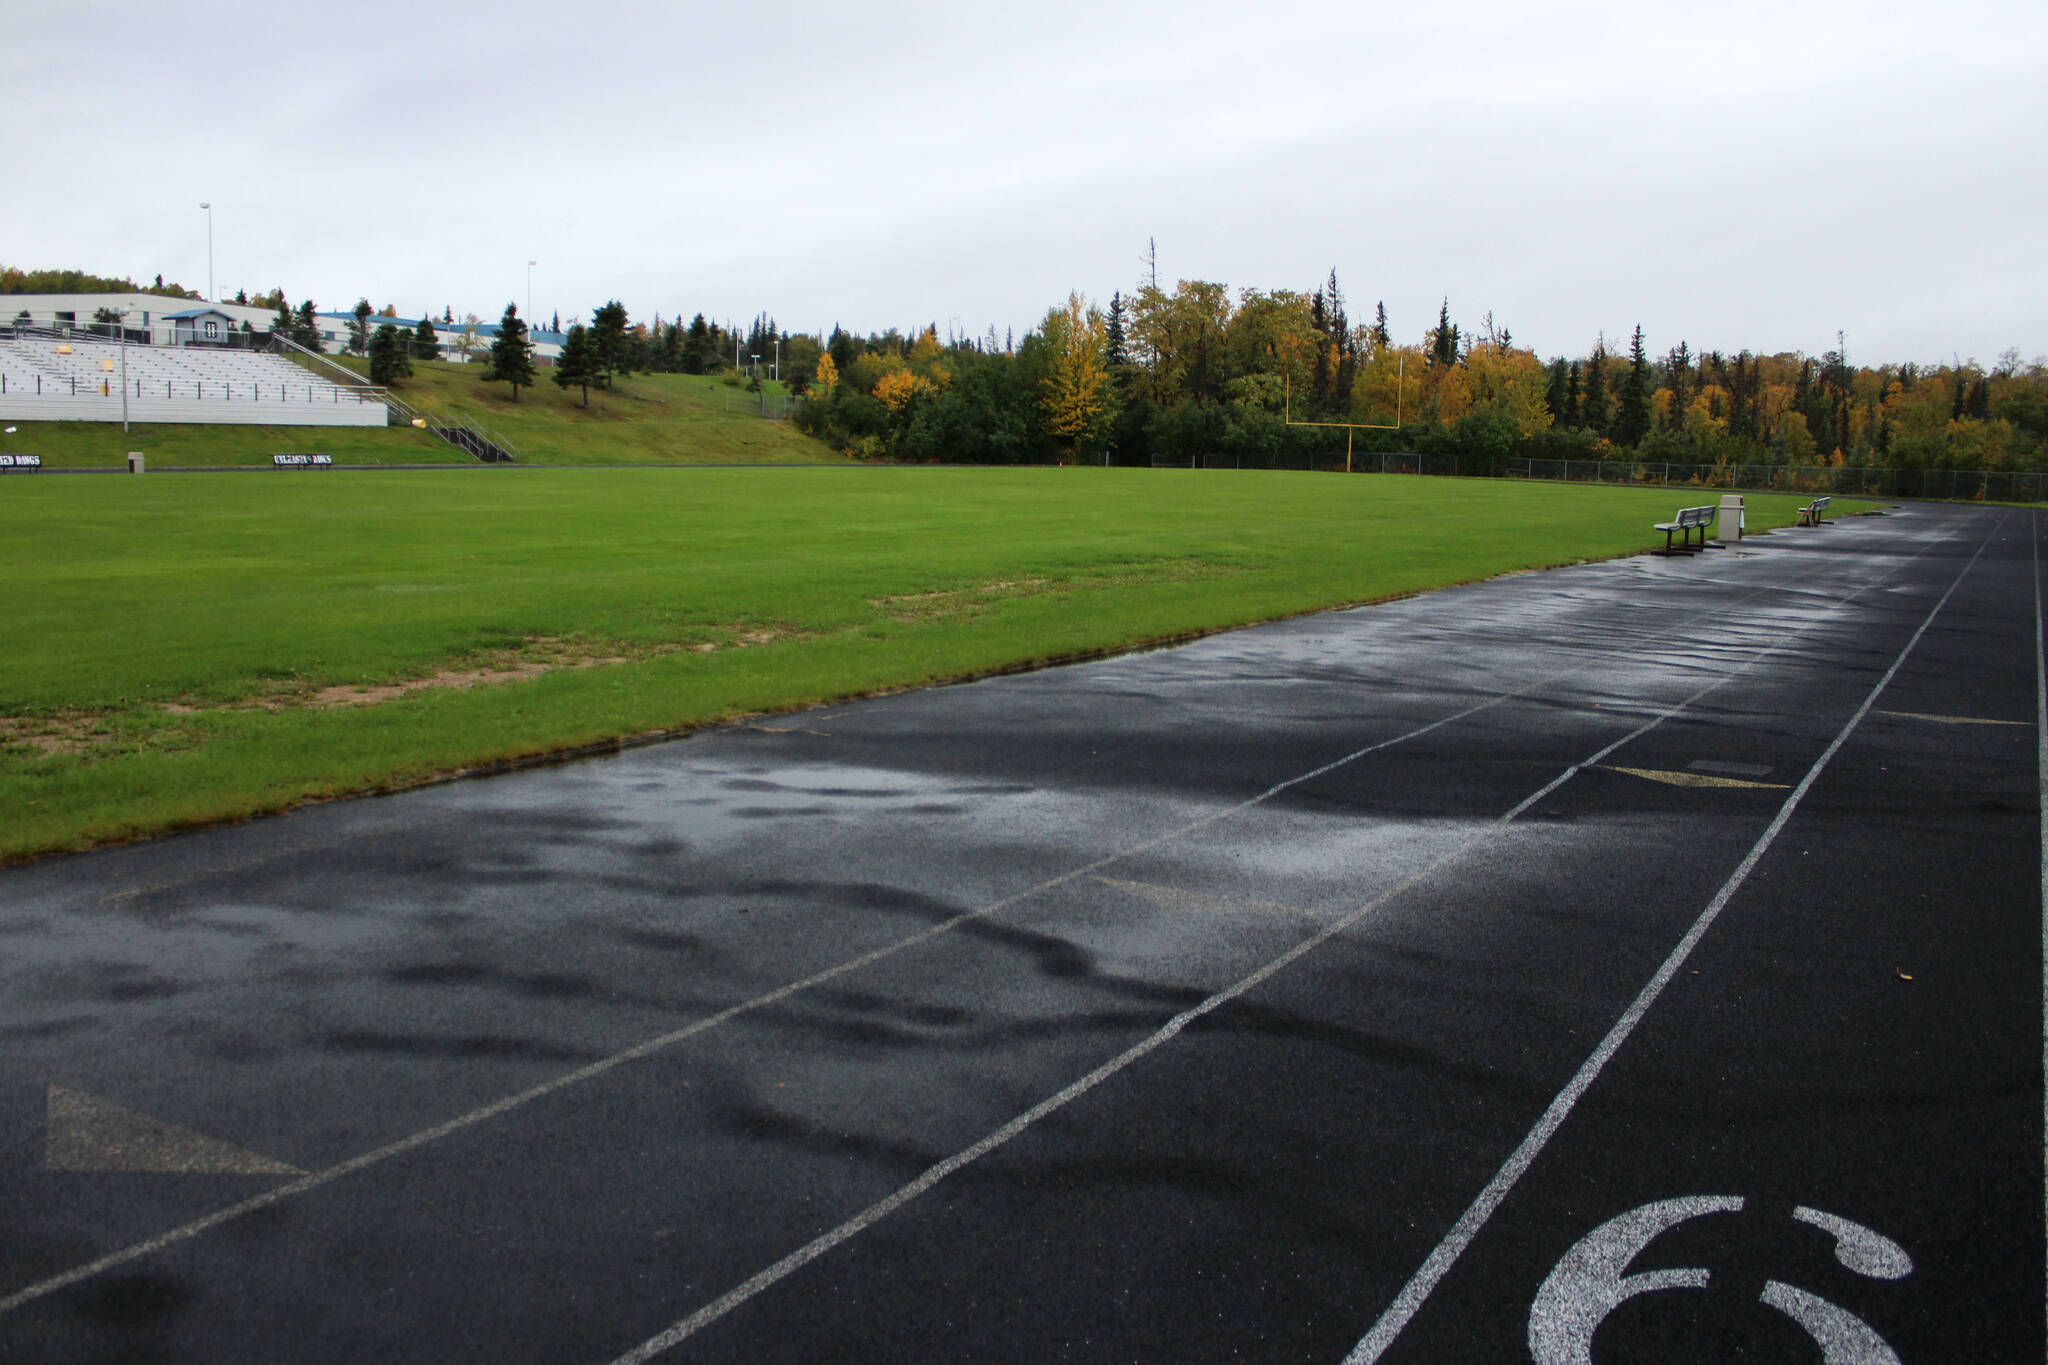 Water pools on a warped track at Nikiski Middle/High School on Monday, Sept. 19, 2022, in Nikiski, Alaska. The track is one of several projects in a bond package Kenai Peninsula voters will consider during the Oct. 4 municipal election next month. (Ashlyn O’Hara/Peninsula Clarion)